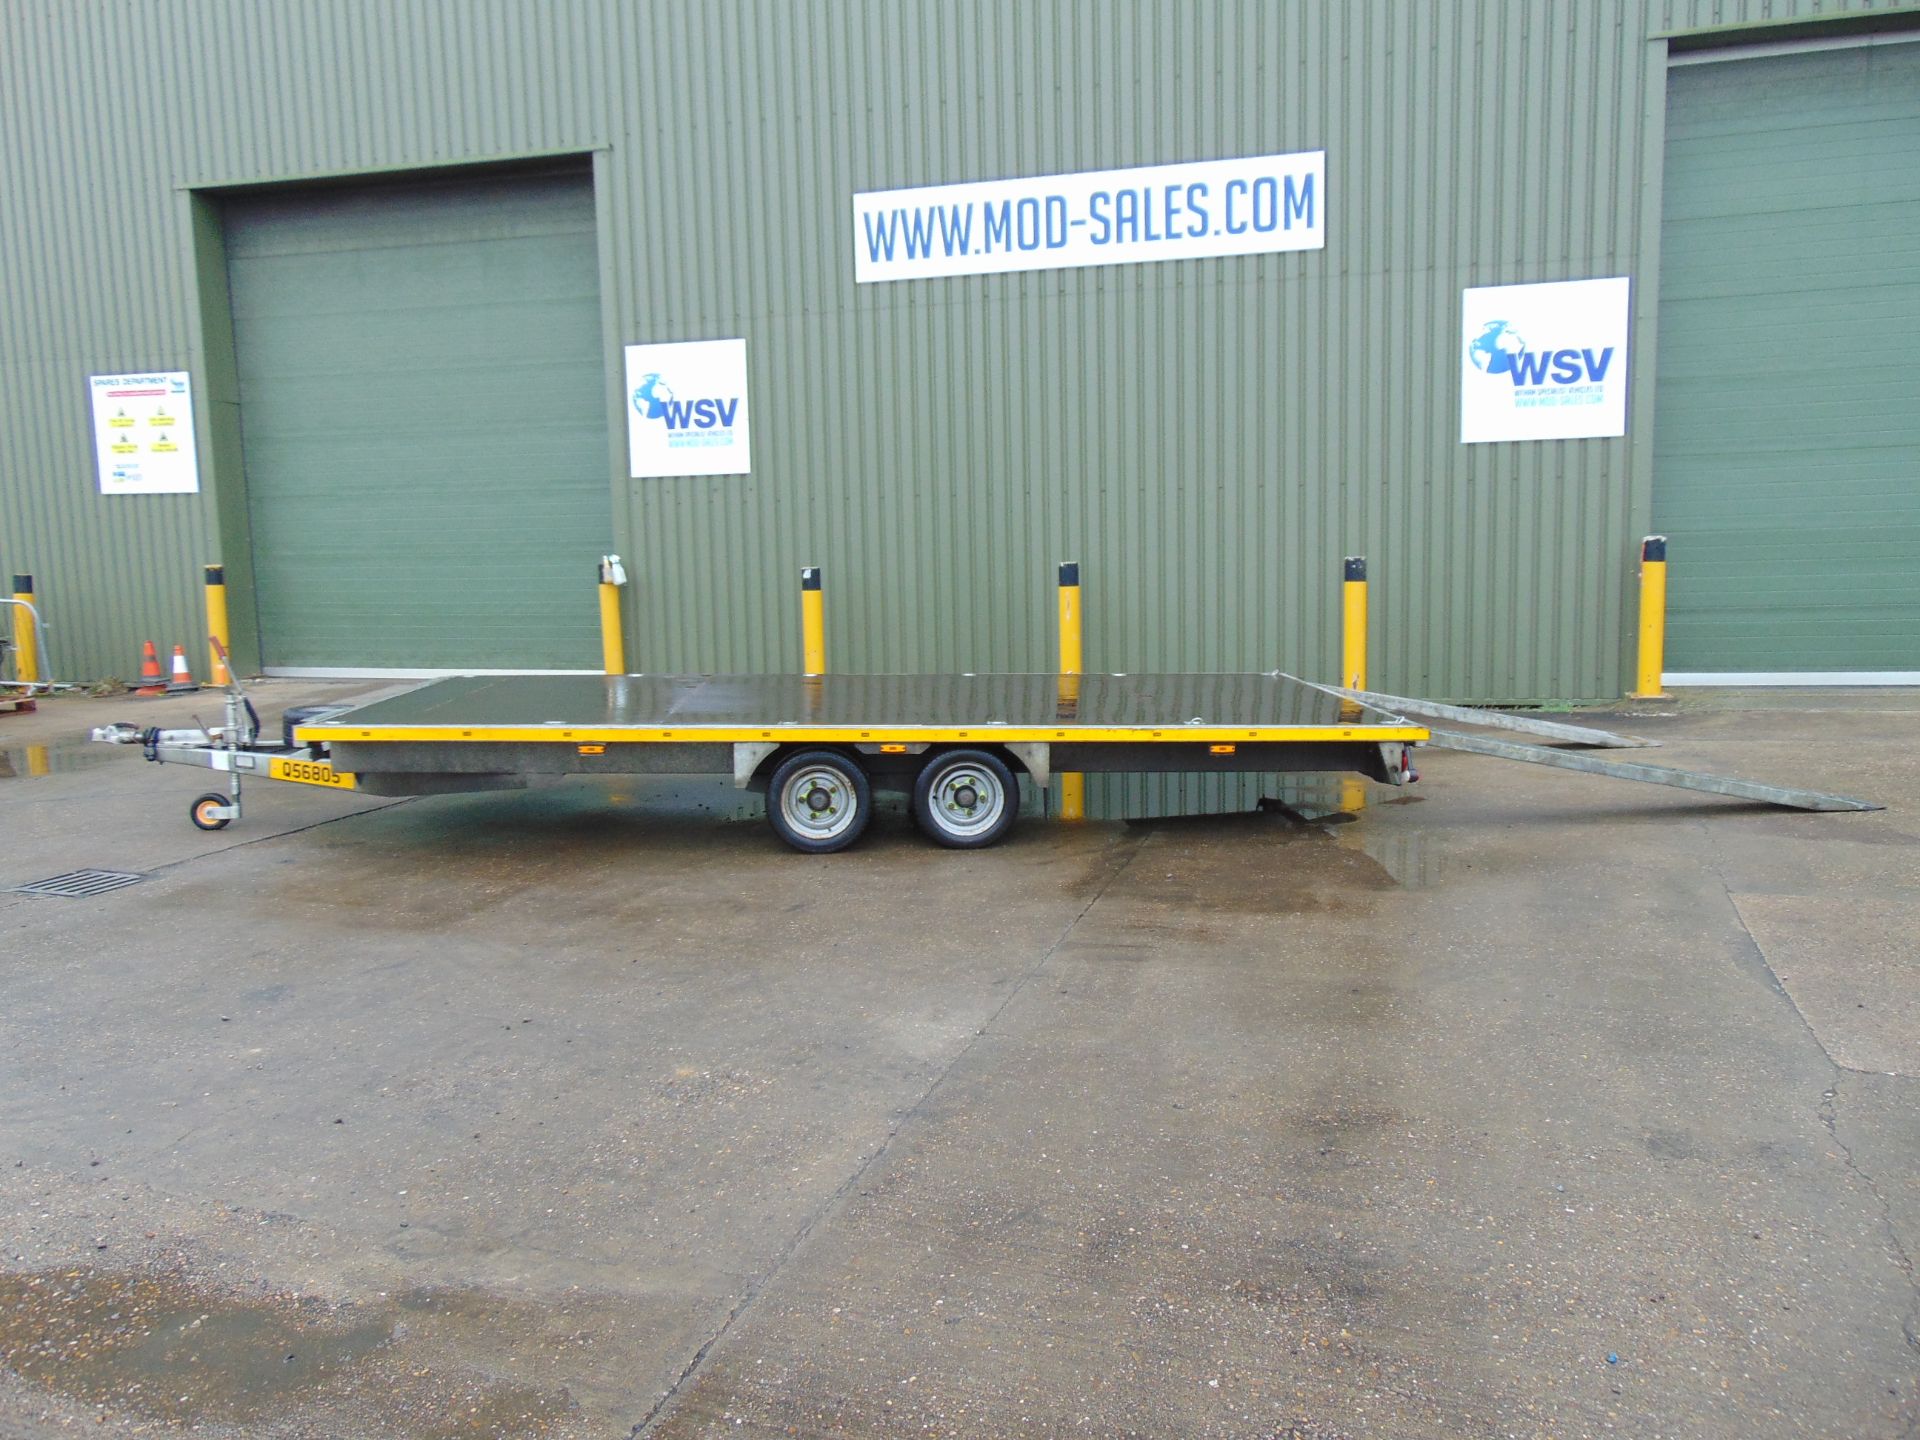 Bateson Twin Axle Flatbed 3.5 Tonne Transporter Trailer with Ramps bed dimensions L 5.8m x W 2.5m - Image 3 of 14